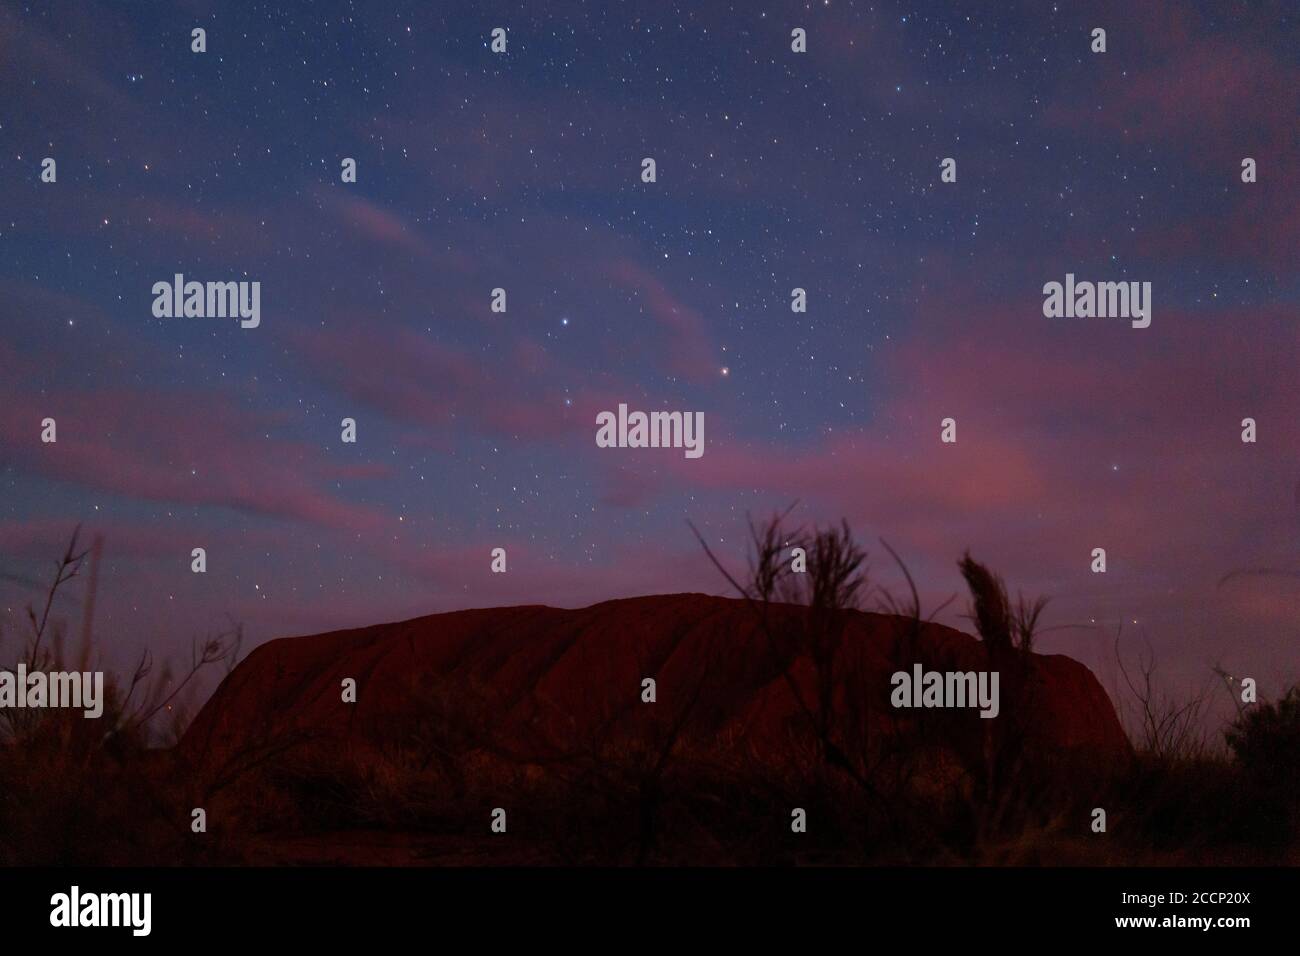 Mount Uluru at night. Stars in the sky and pink clouds. Eroded rock, orange color. Low bushes in front. Northern Territory NT, Australia Stock Photo